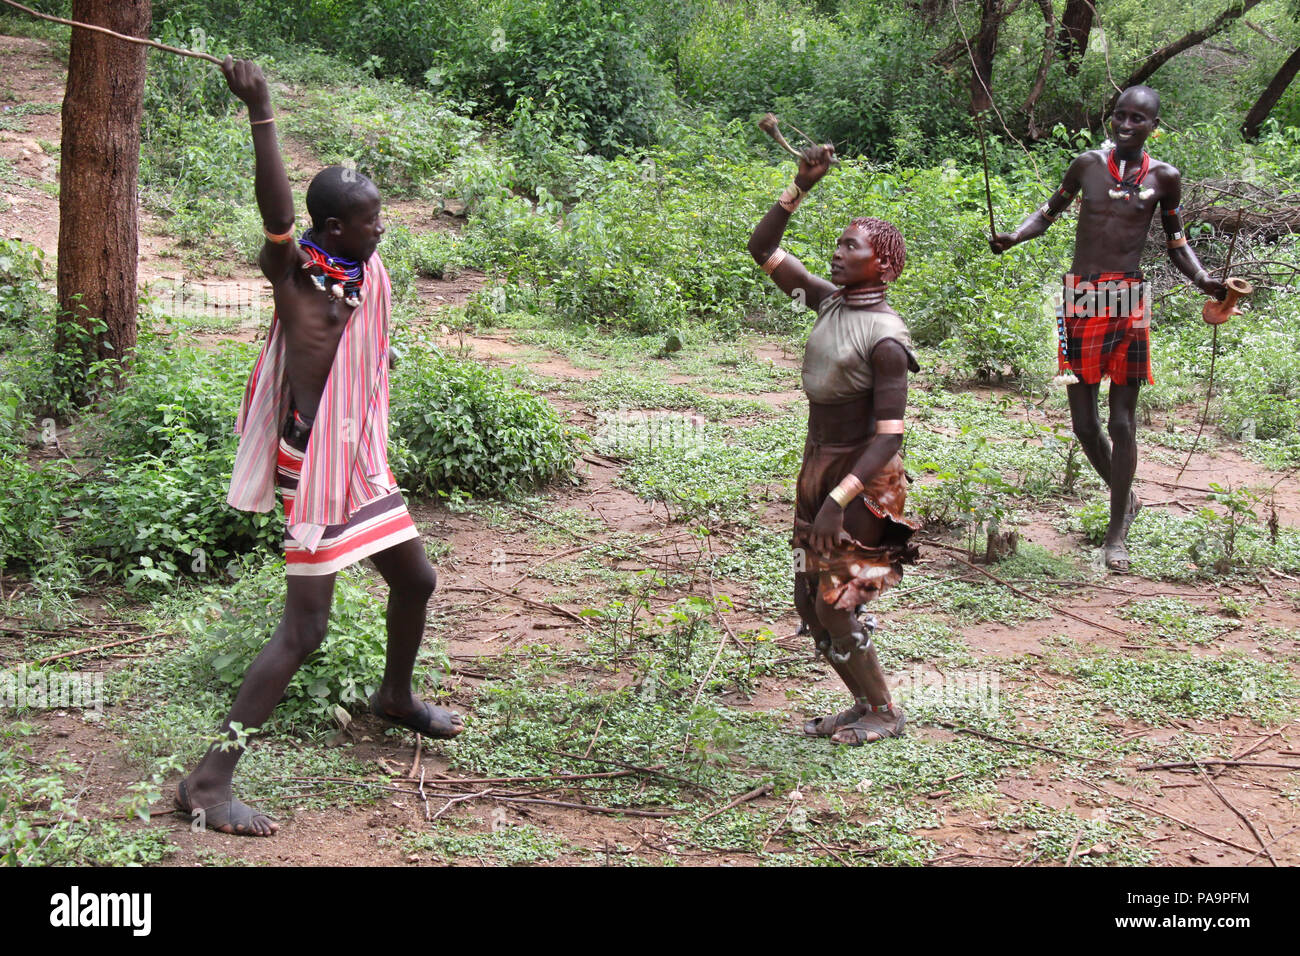 Hamer man whipping a woman during Bull Jumping ceremony (Ukuli ...